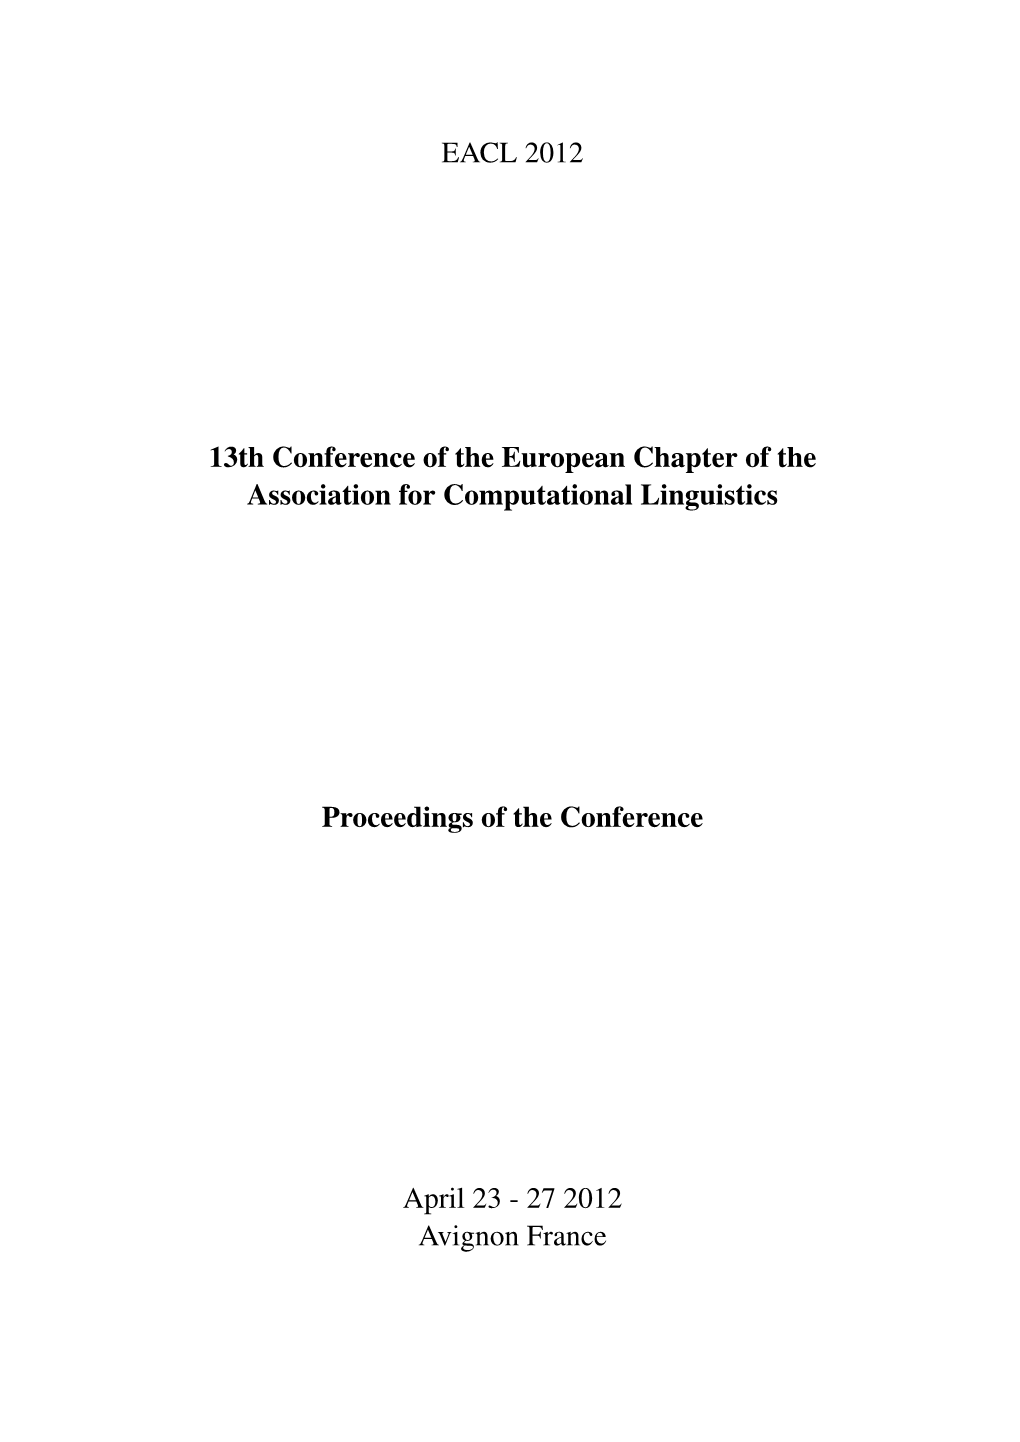 Proceedings of the 13Th Conference of the European Chapter of The